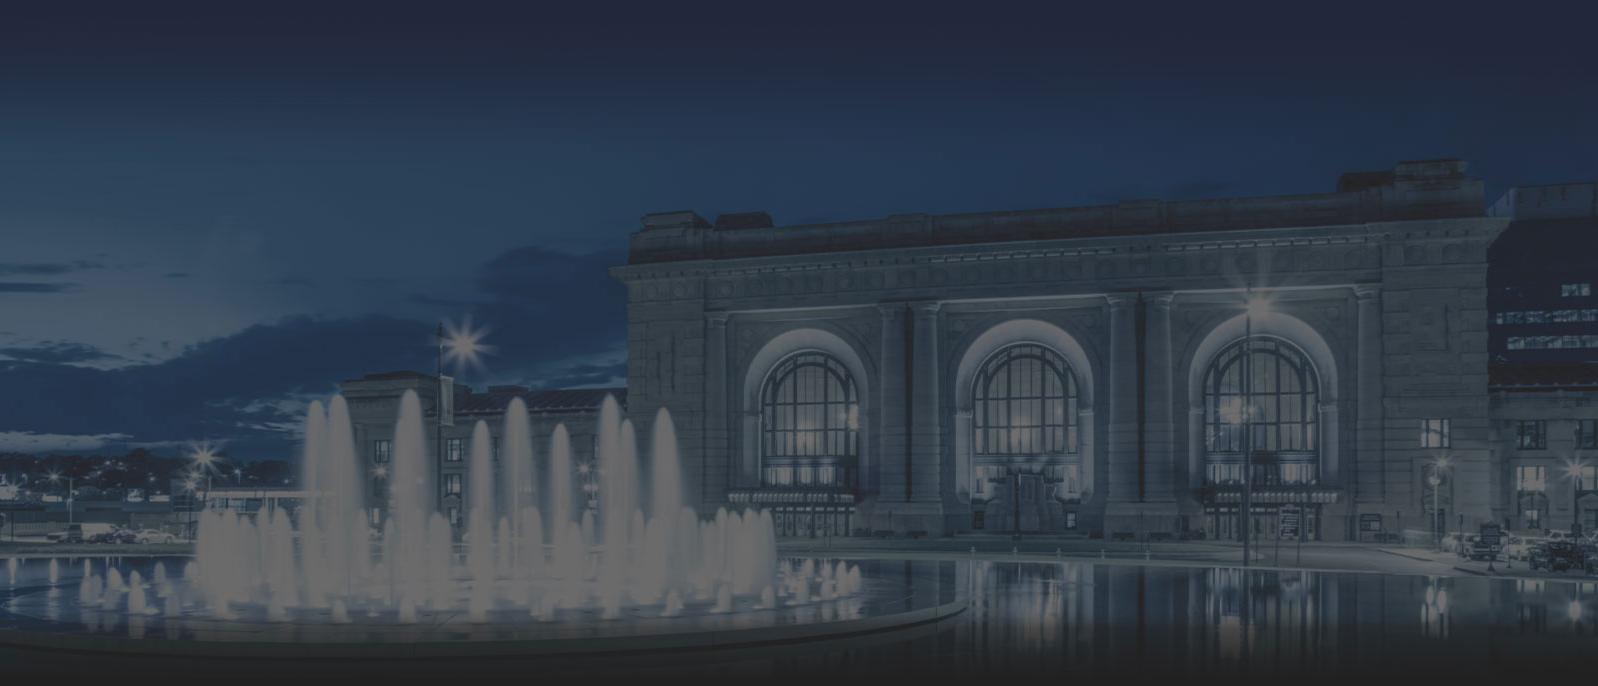 Union Station and the Henry Wollman Bloch Memorial Fountain at dusk.